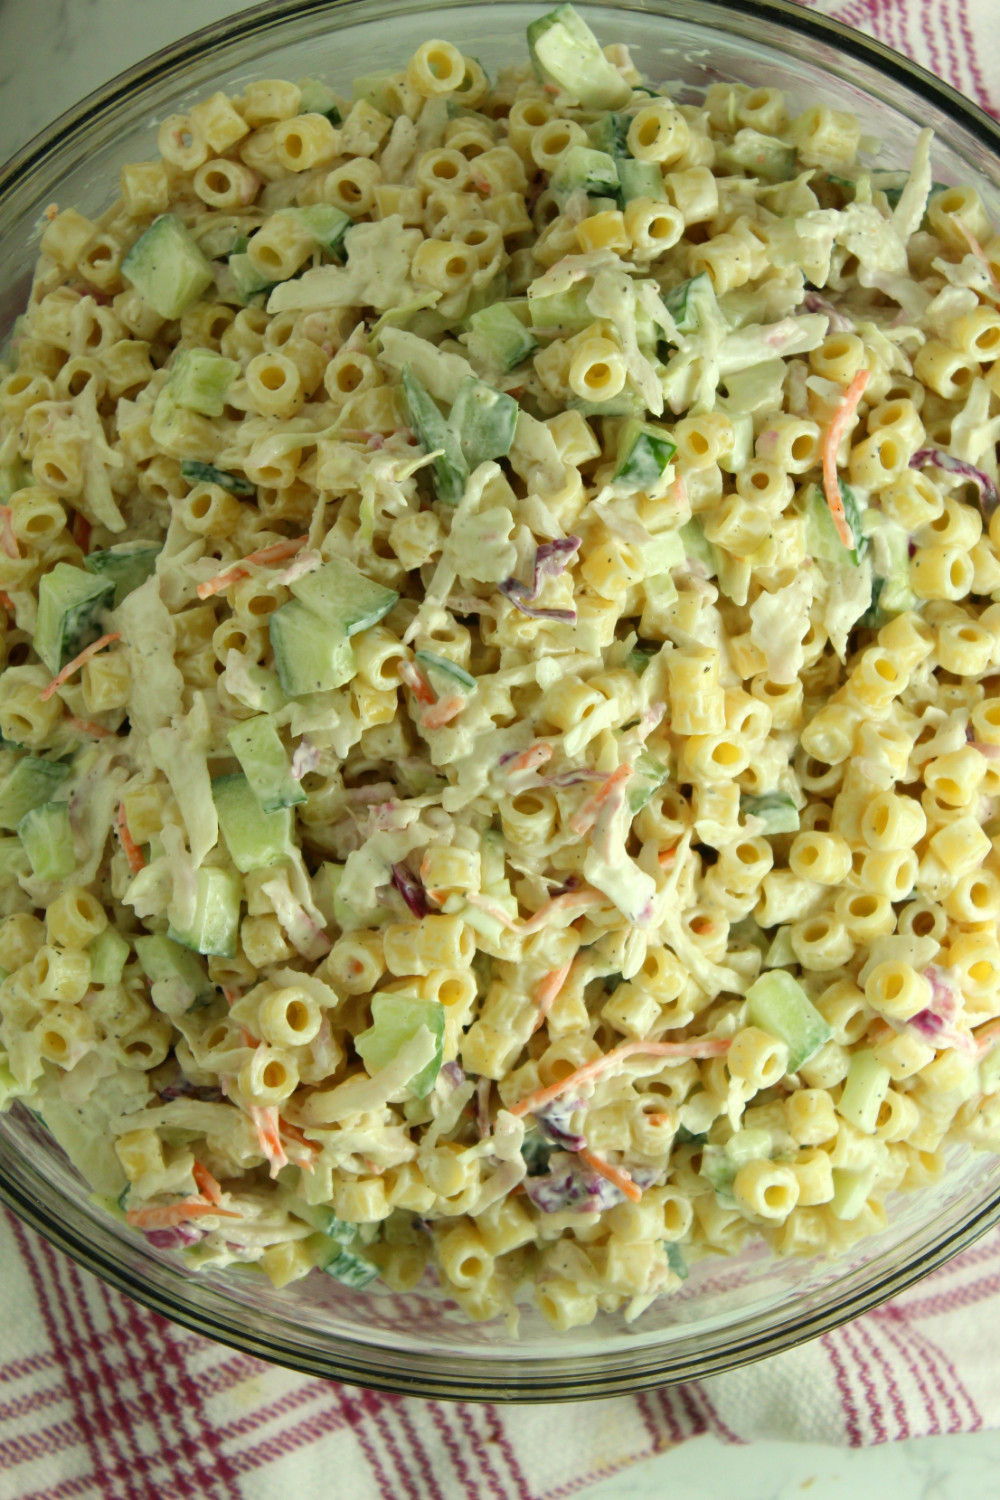 Top 21 Cold Macaroni Salad with Cheese Cubes - Best Recipes Ideas and